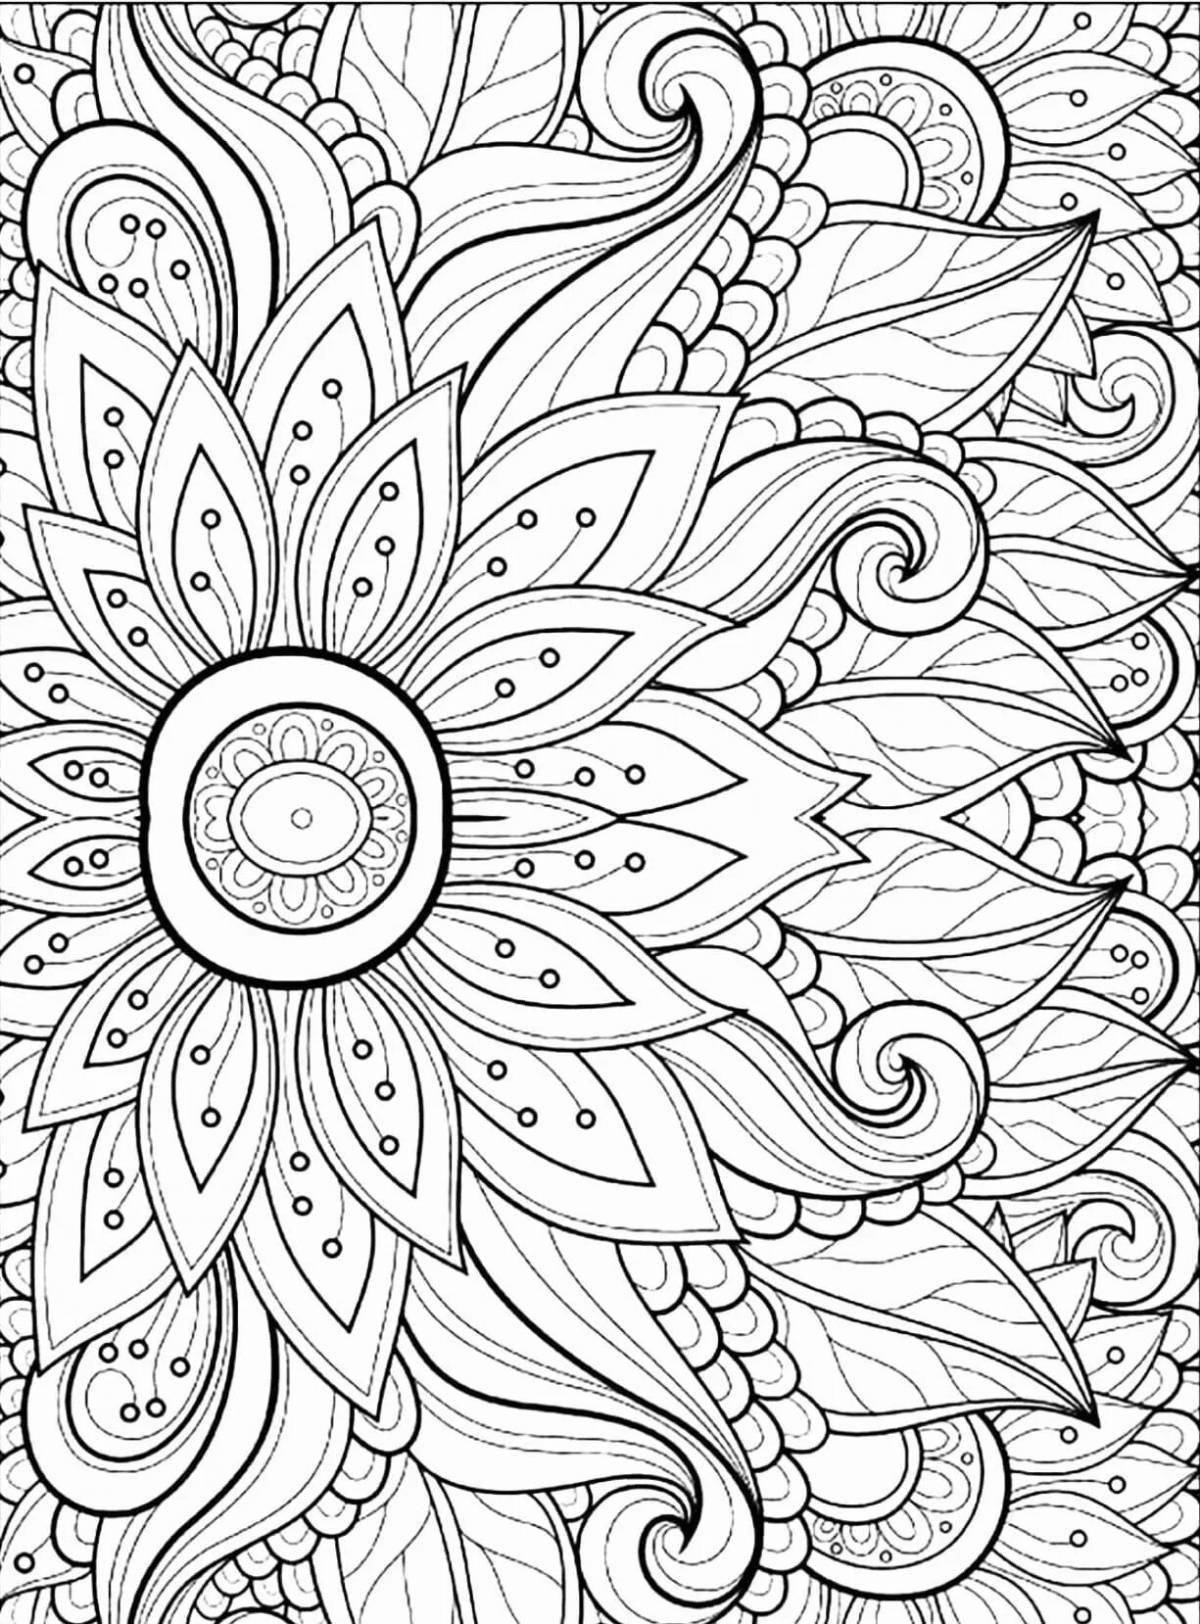 Blissful coloring to relax the nervous system